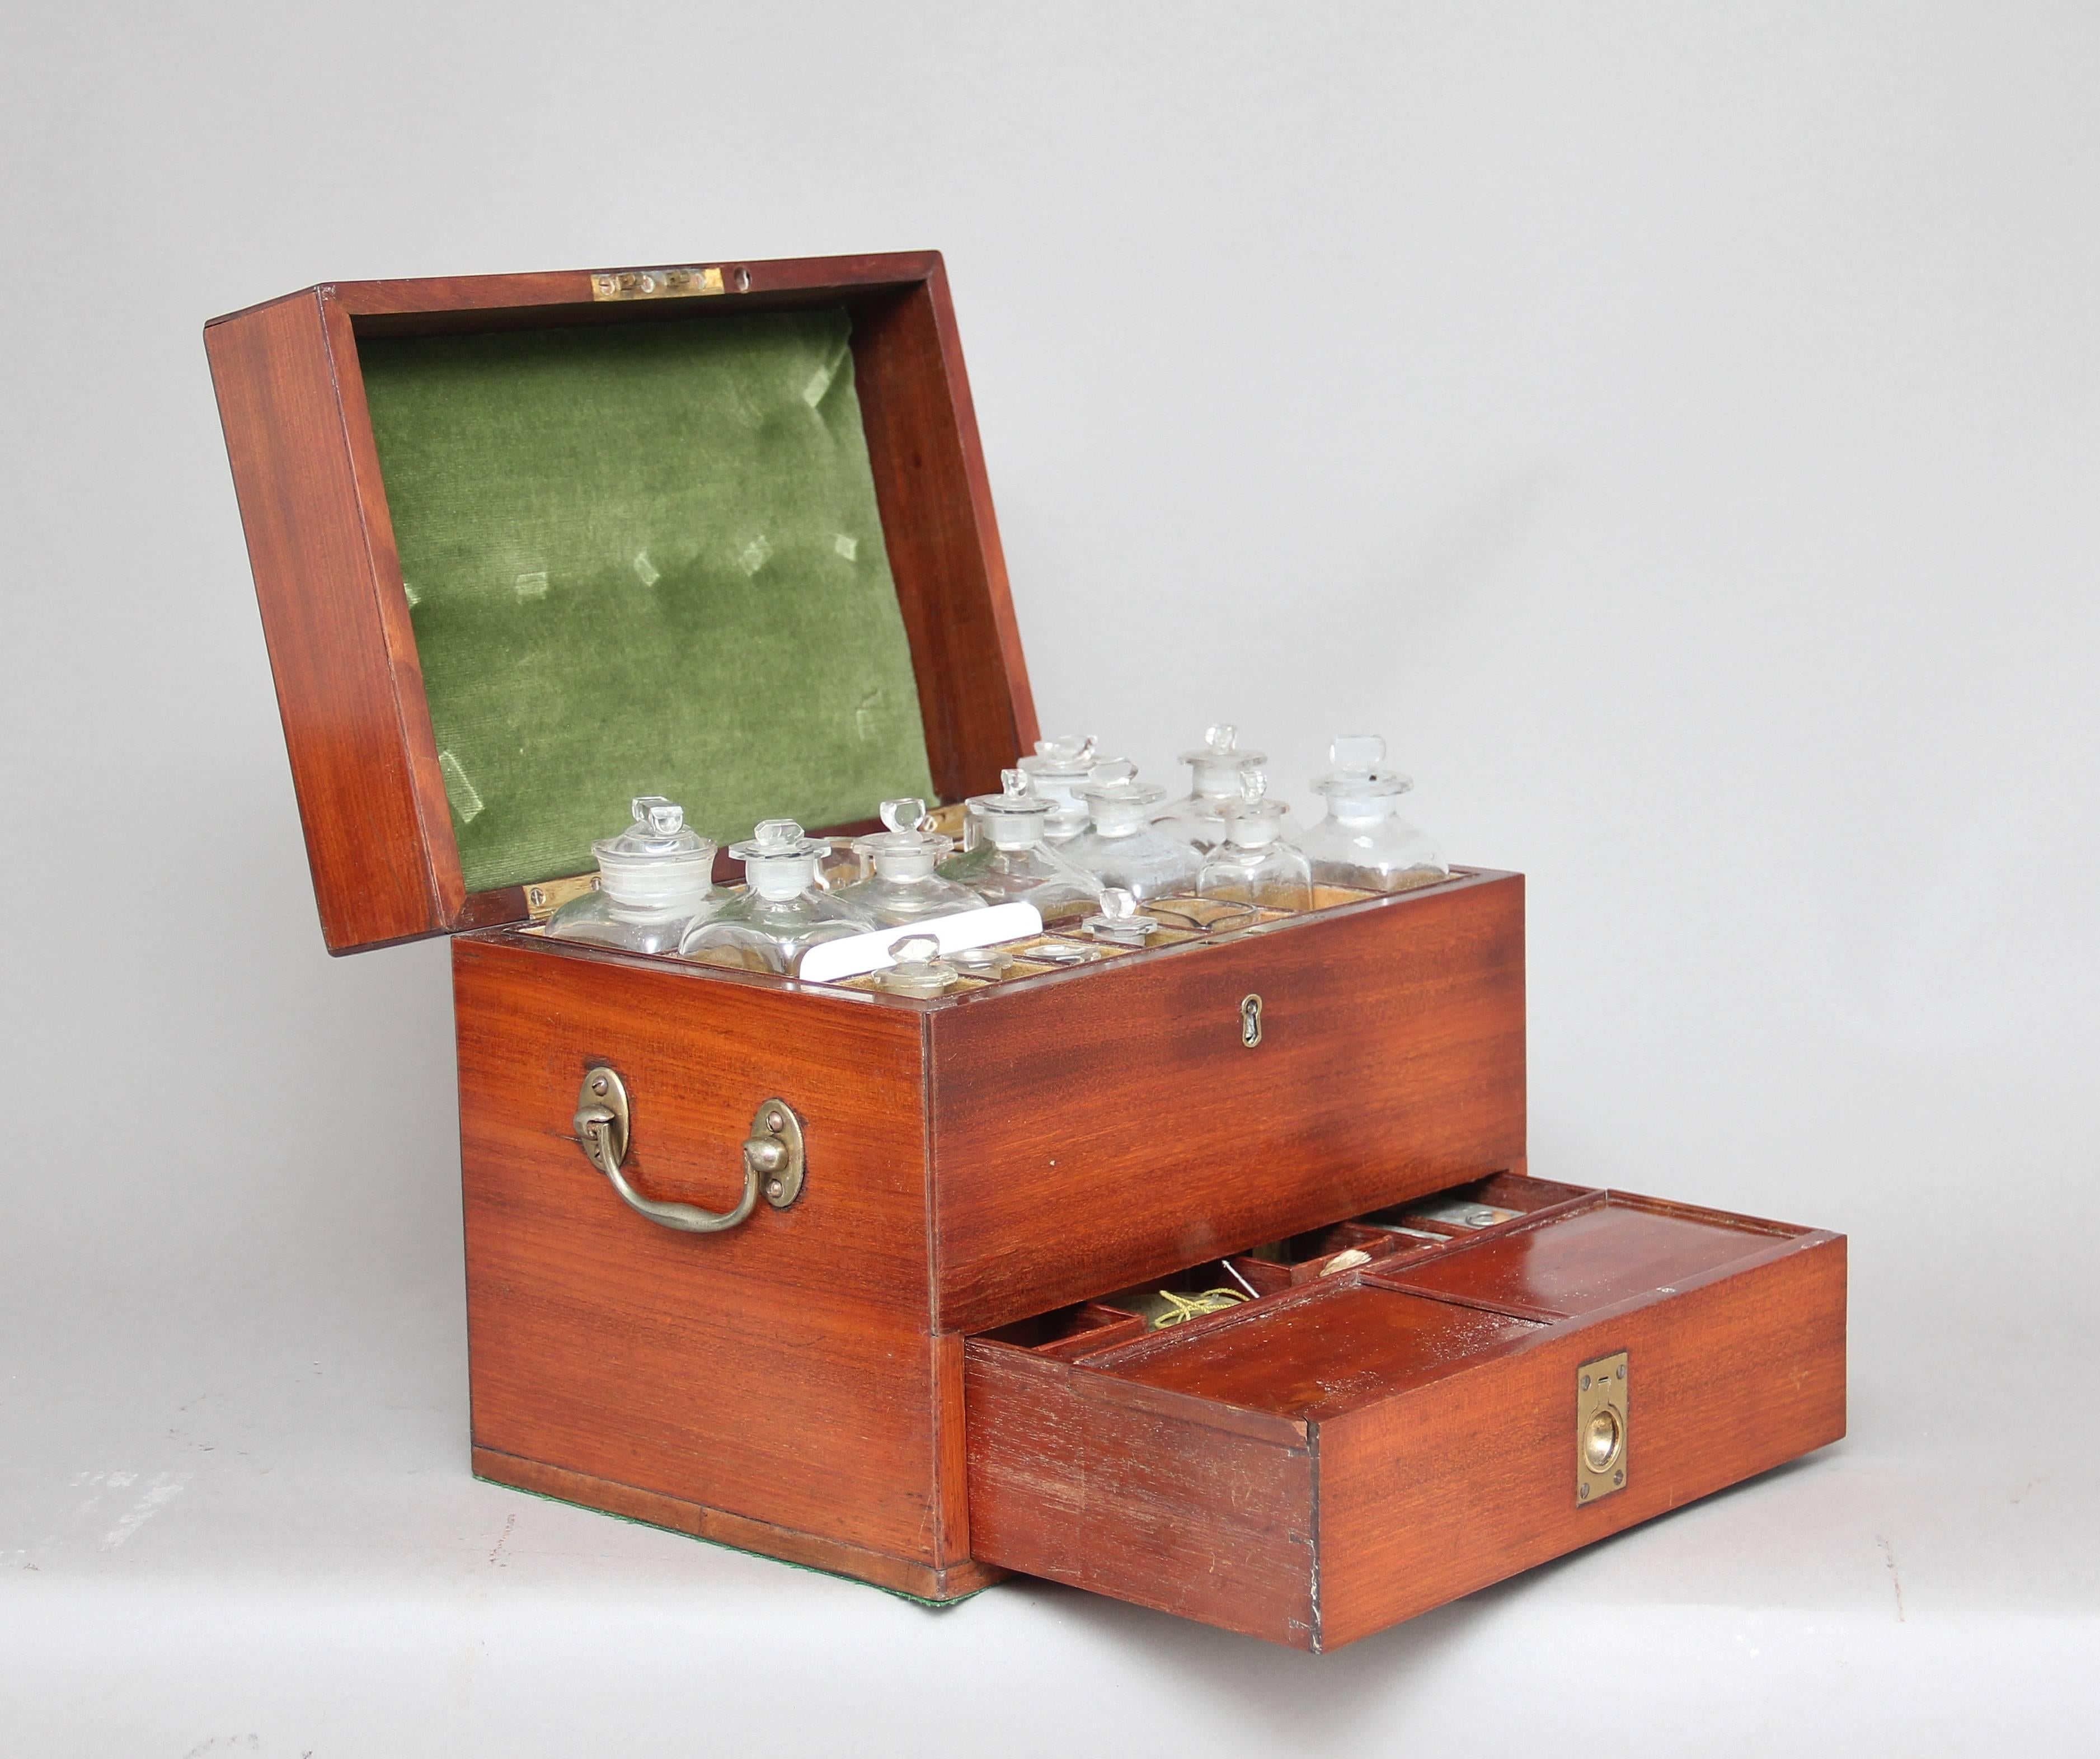 19th century mahogany apothecary box of good proportions, with original brass swan neck carrying handles at the sides, the hinged top opening to reveal various compartments with glass jars of various sizes, the front of the box there is a pull-out